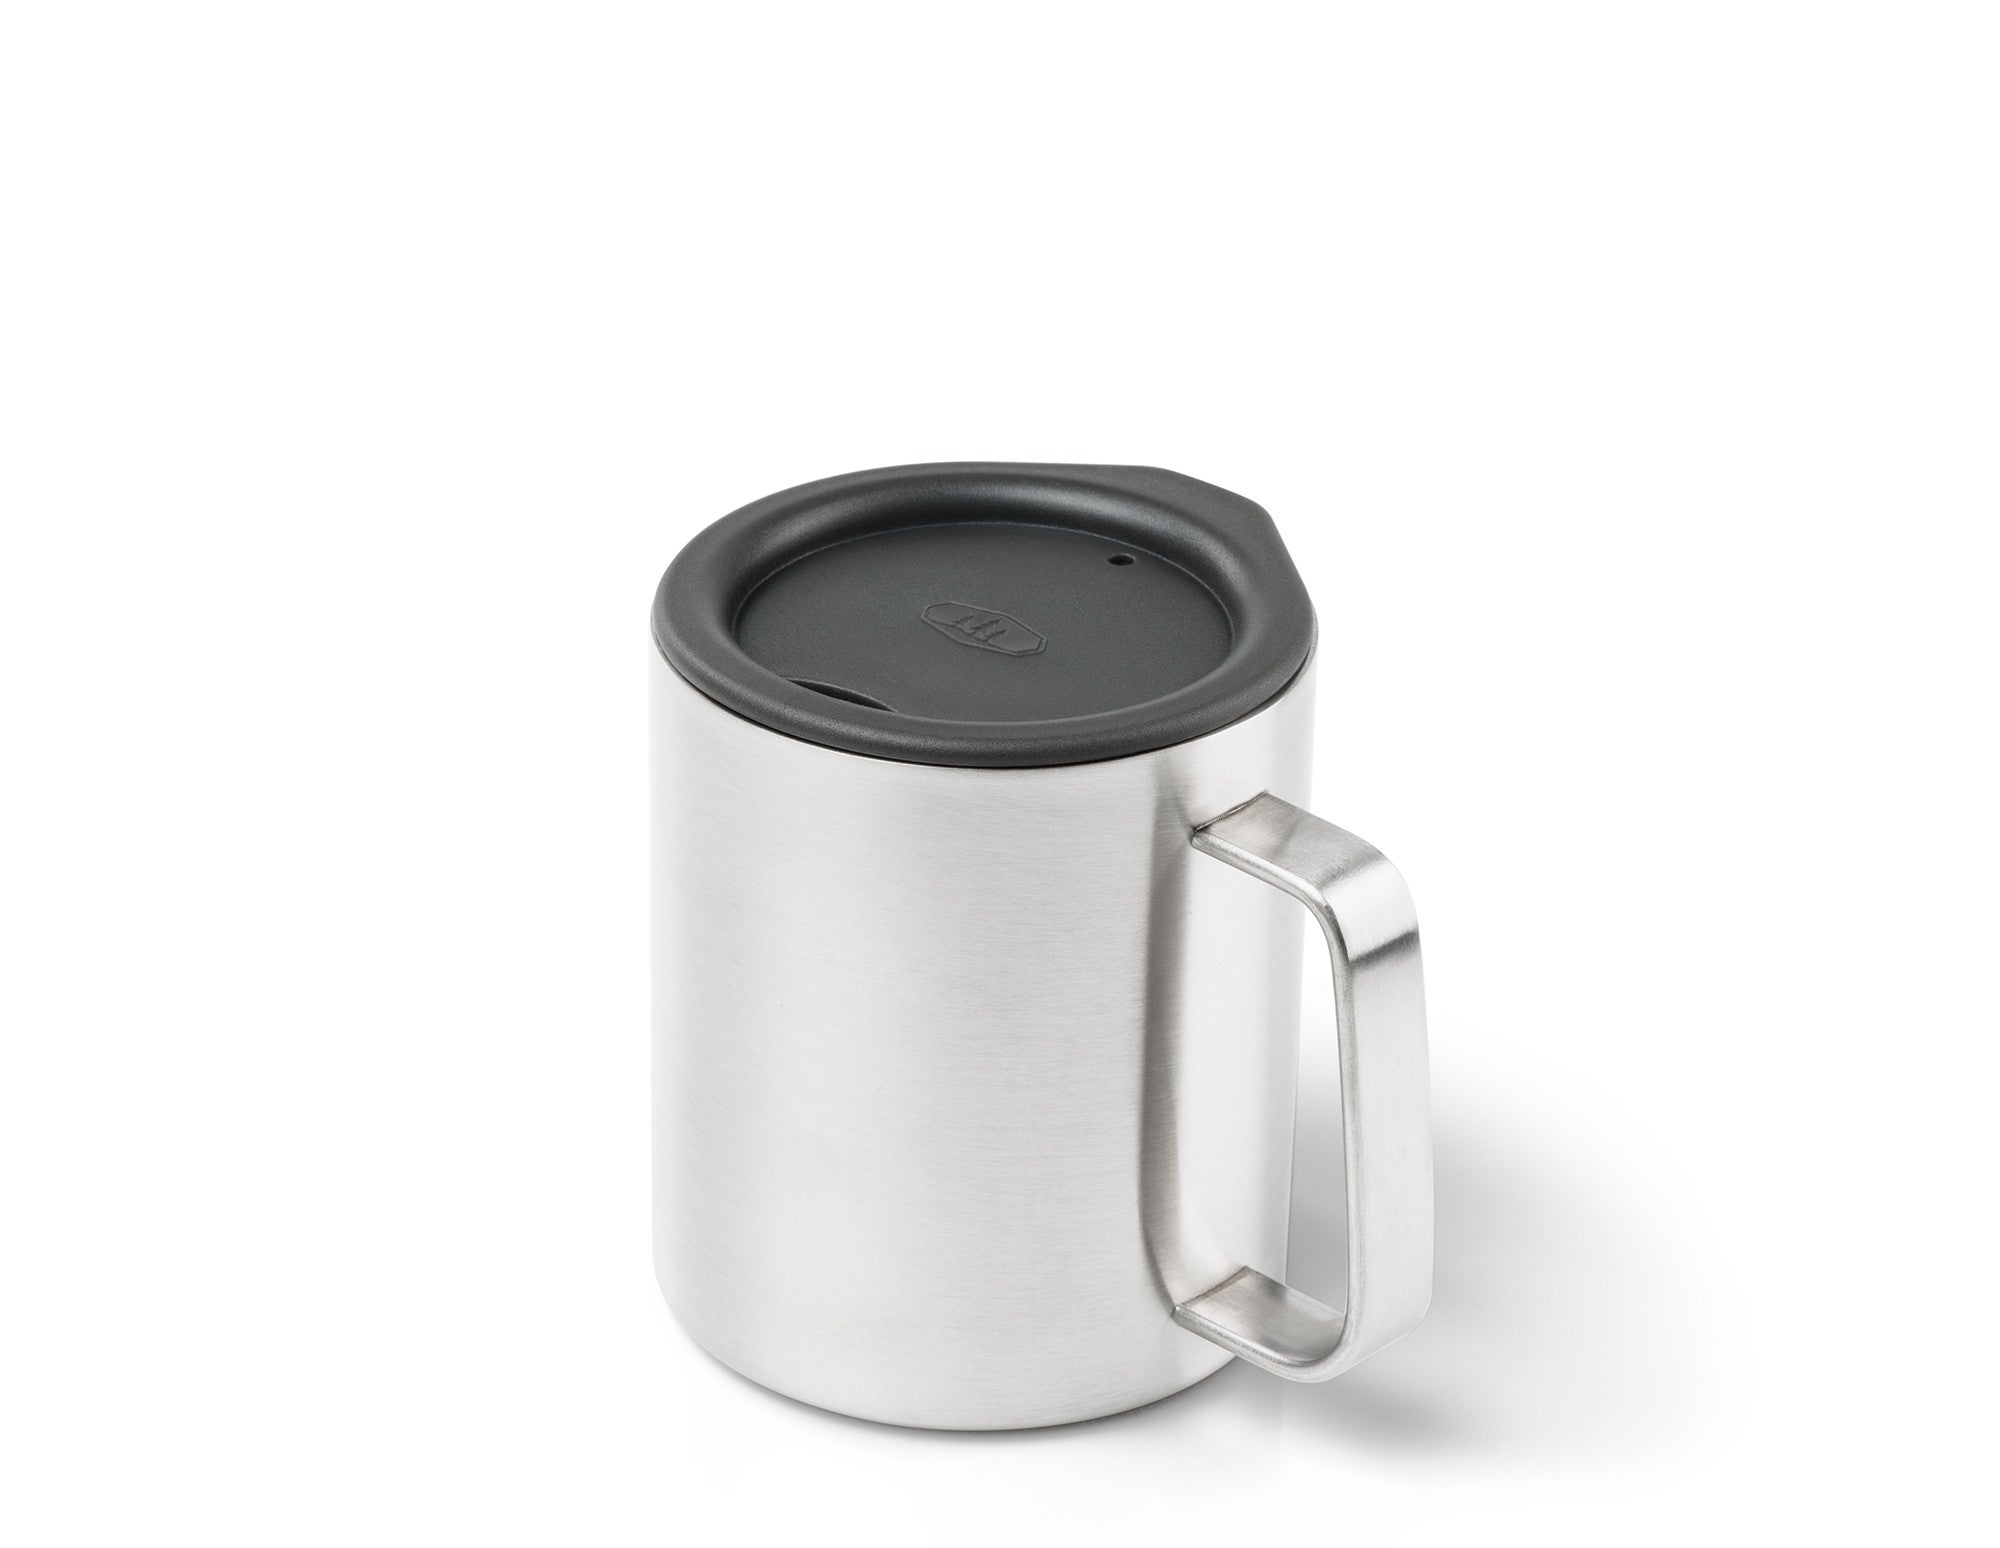 GSI Outdoors Glacier Stainless Double Walled Espresso Cup